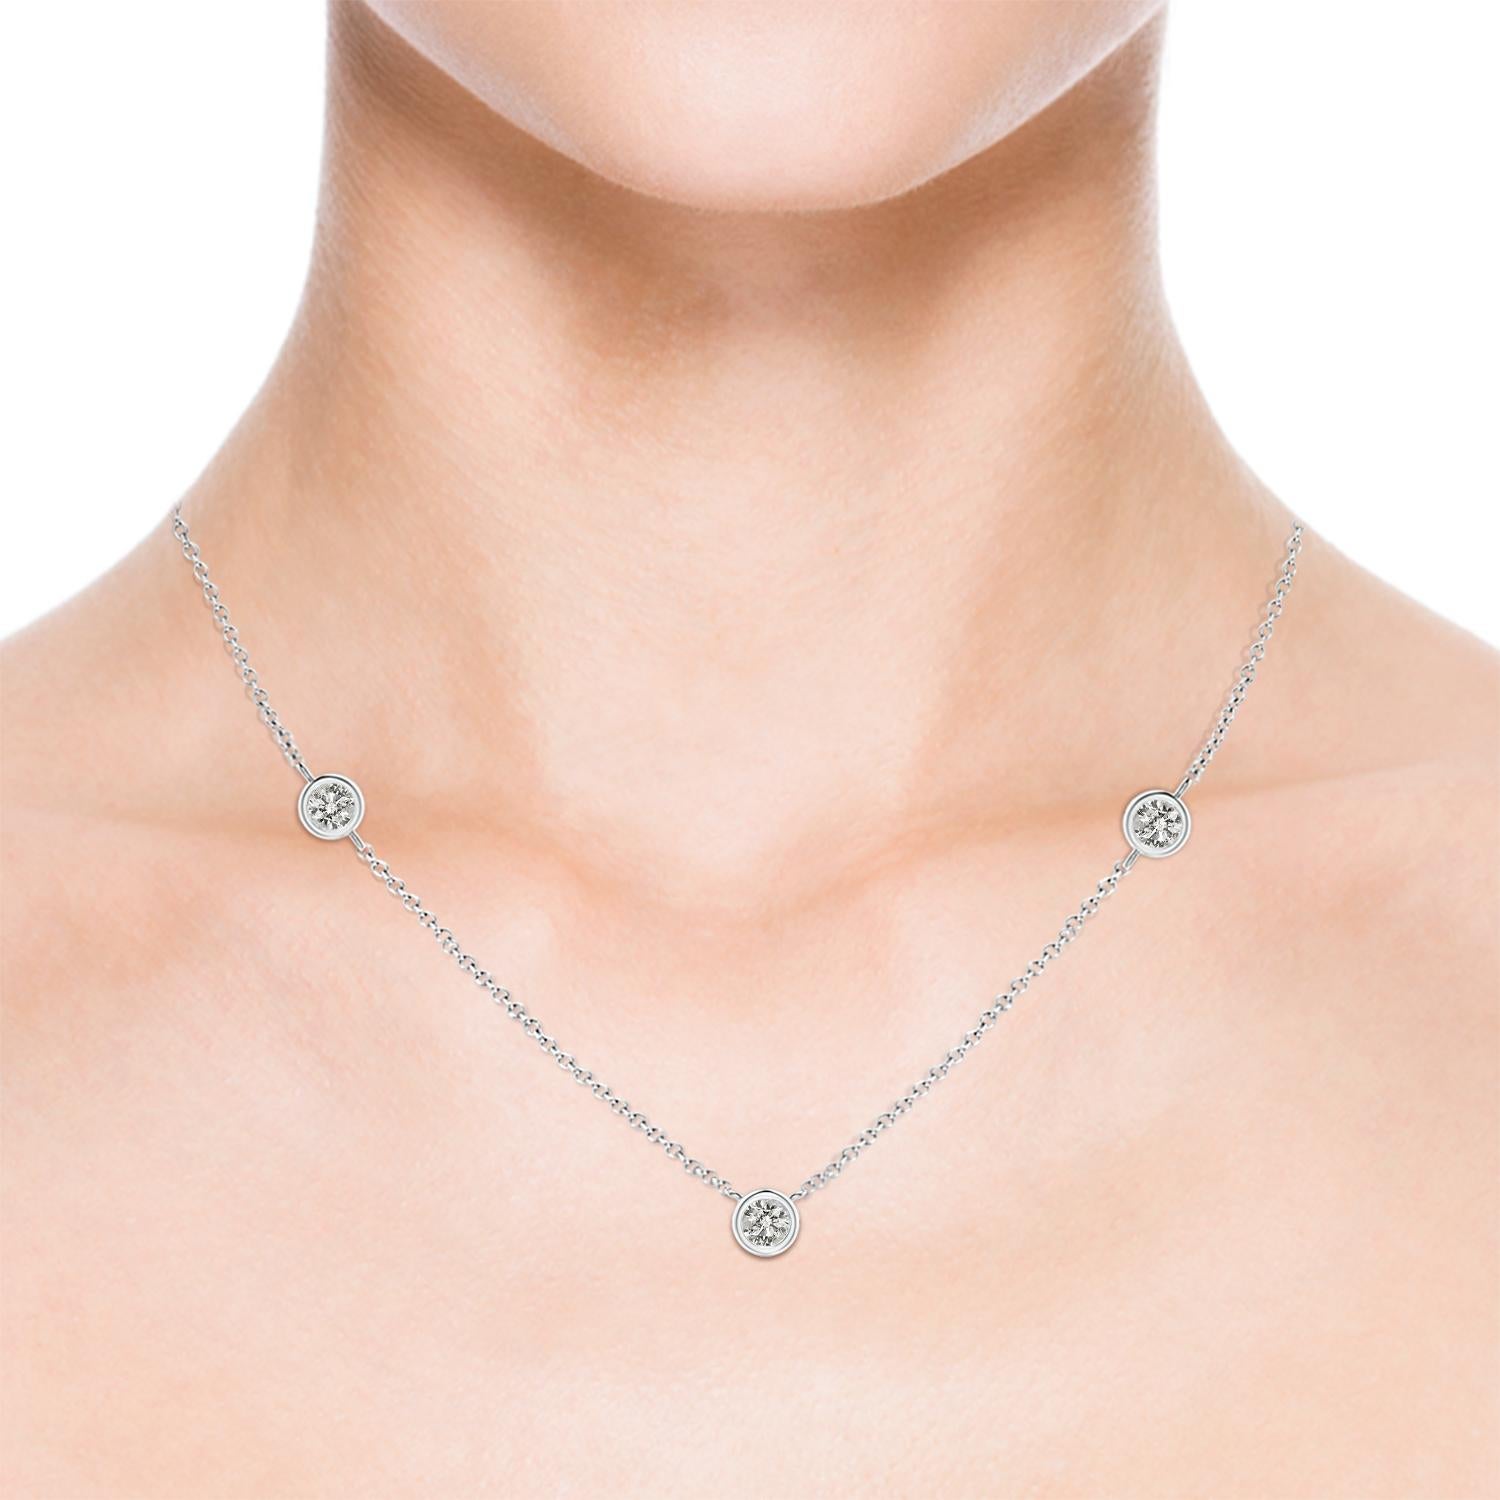 This elegant and stylish necklace by the yard is adorned with round station diamonds in bezel settings. It is crafted in 14k white gold and is sure to stand out.
Diamond is the Birthstone for April and traditional gift for 10th wedding